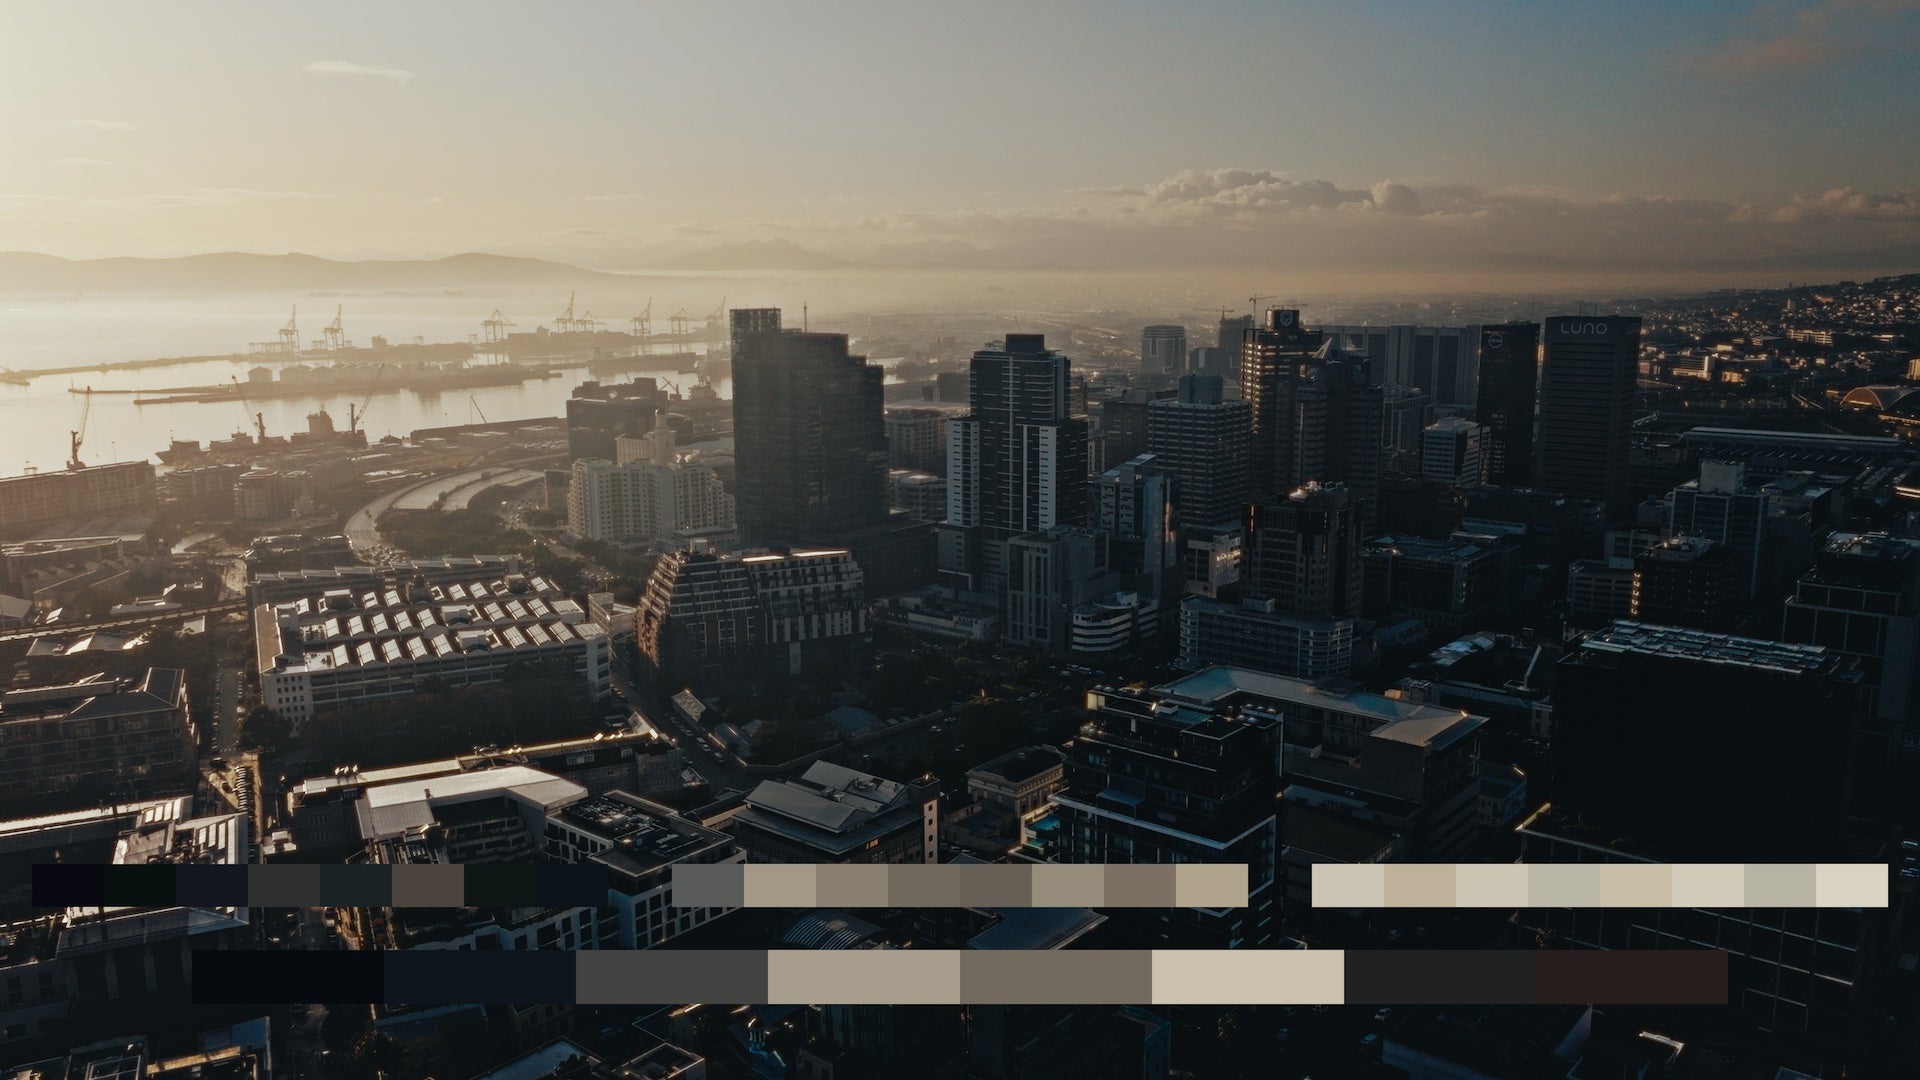 DJI Air 3 LUTs pack before and after